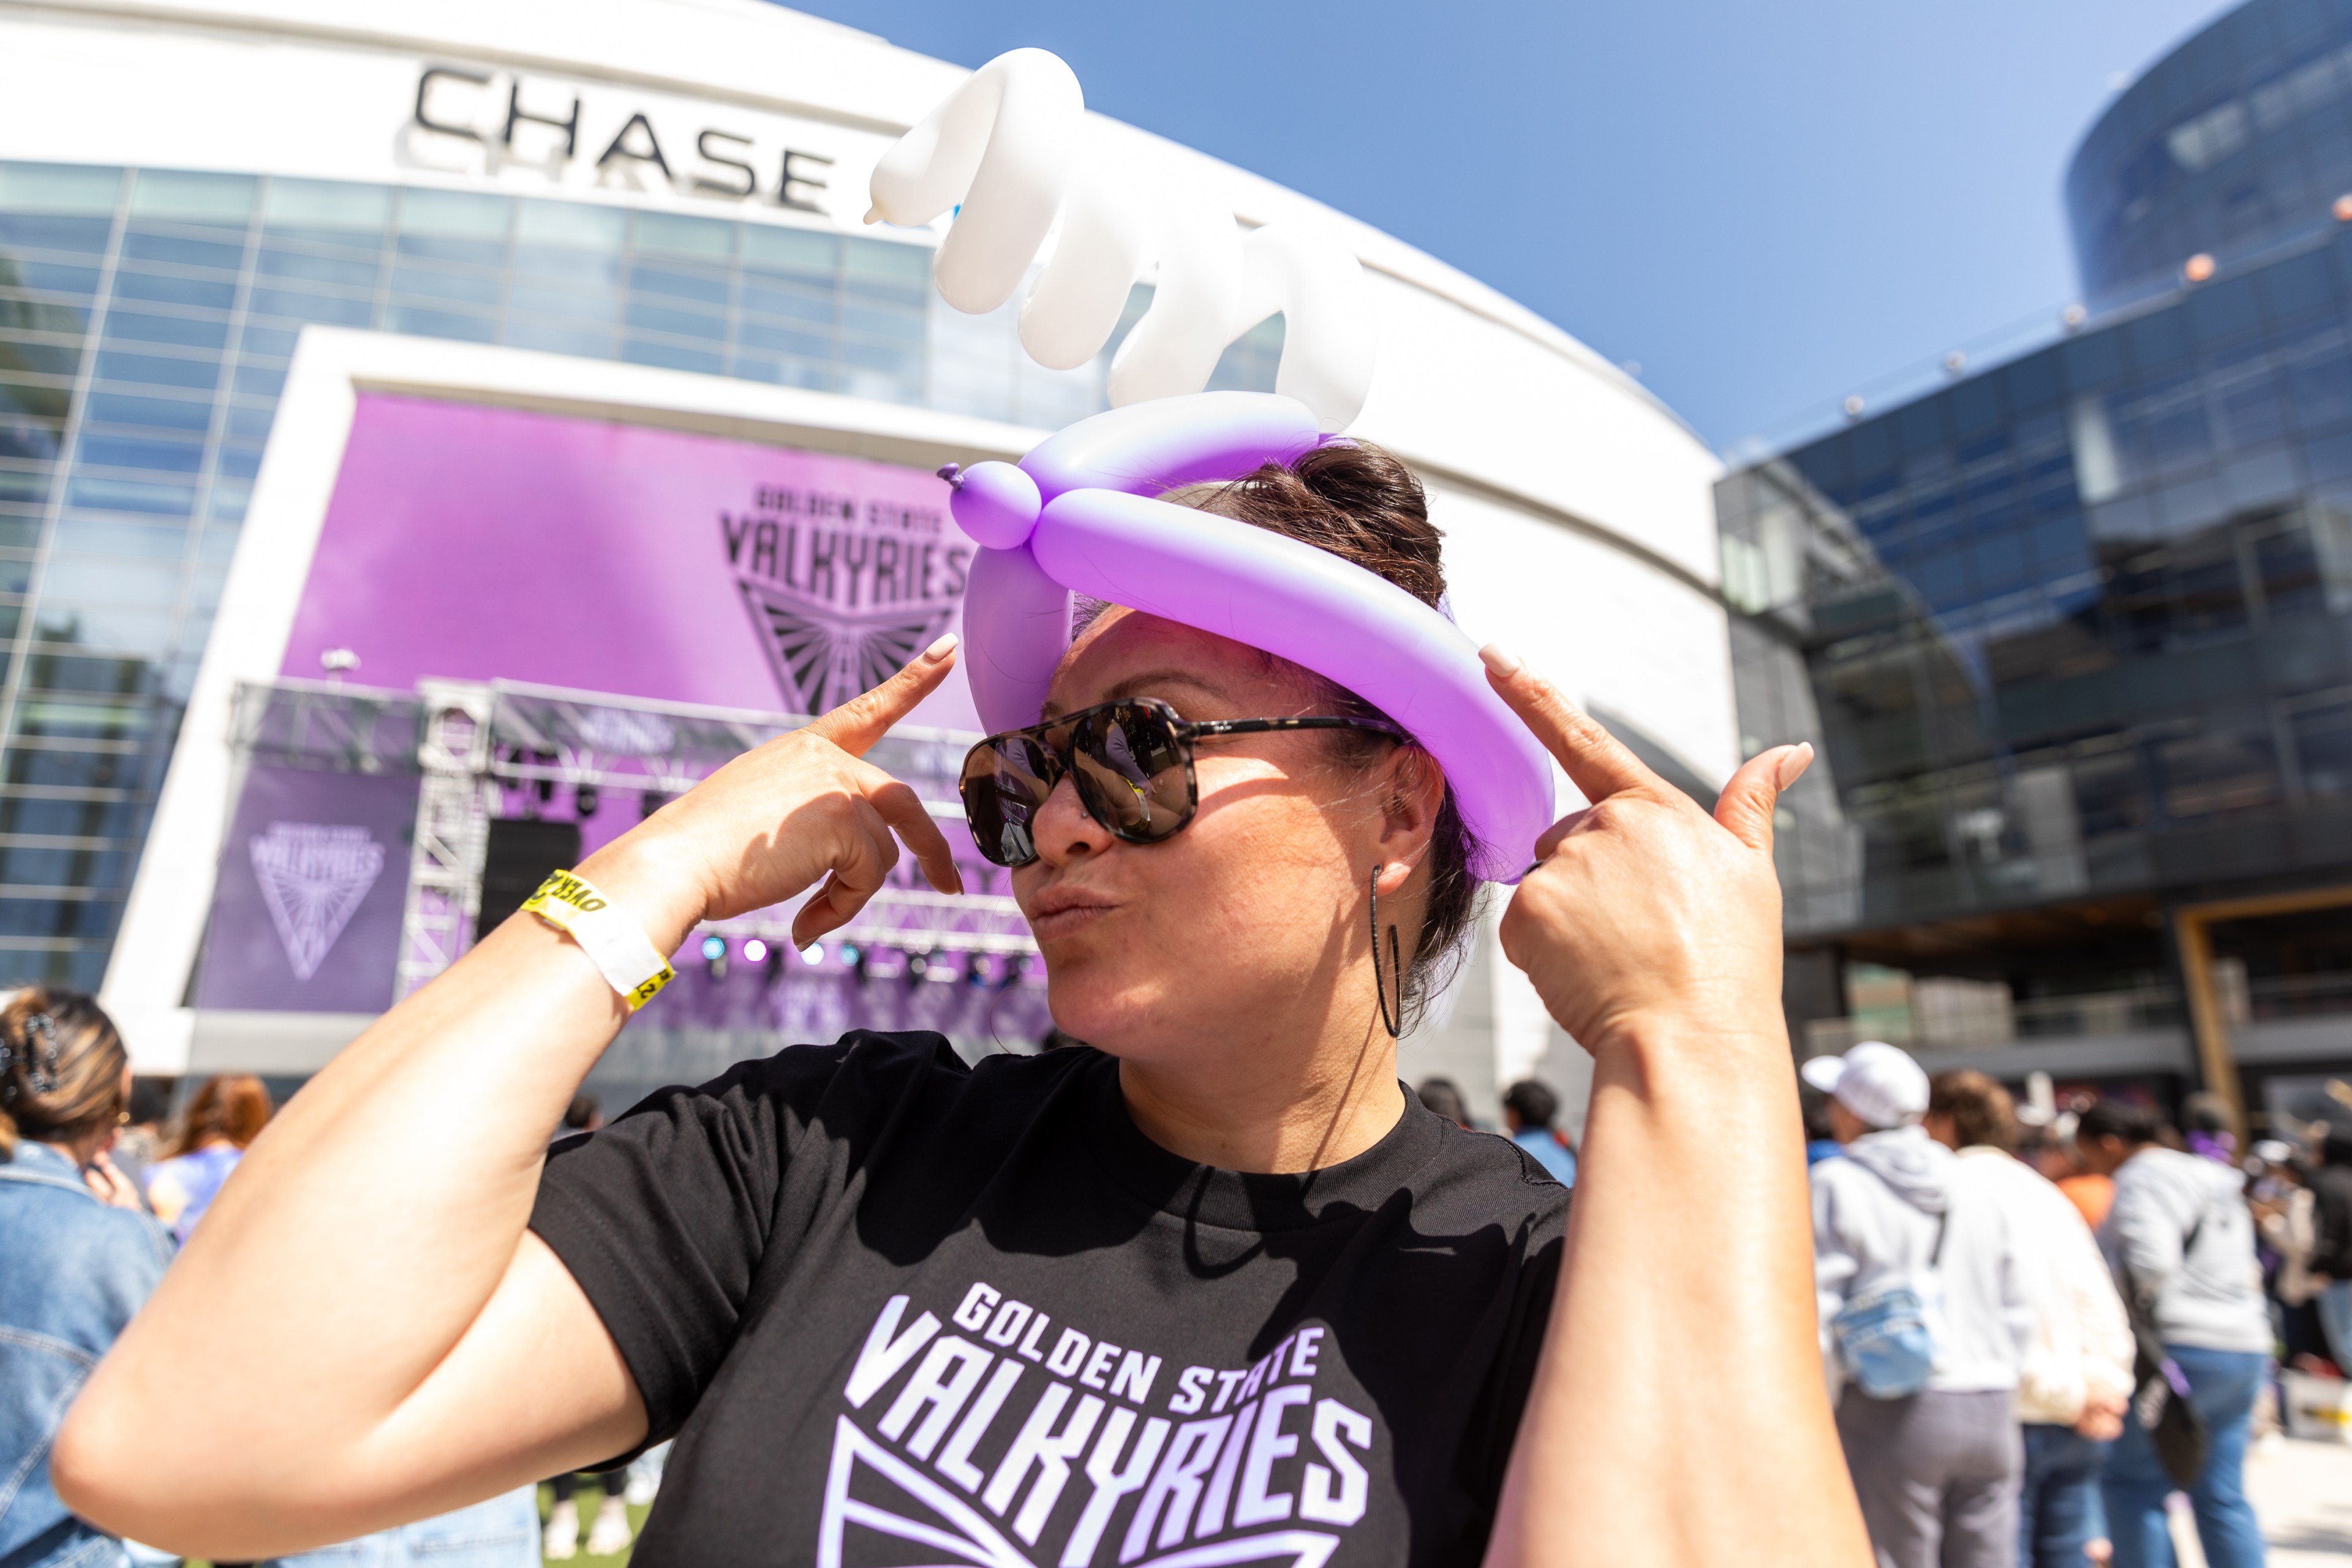 A woman gestures a peace sign, wearing sunglasses and a purple balloon hat at an outdoor event named "Golden State Valkyries" near the Chase building.